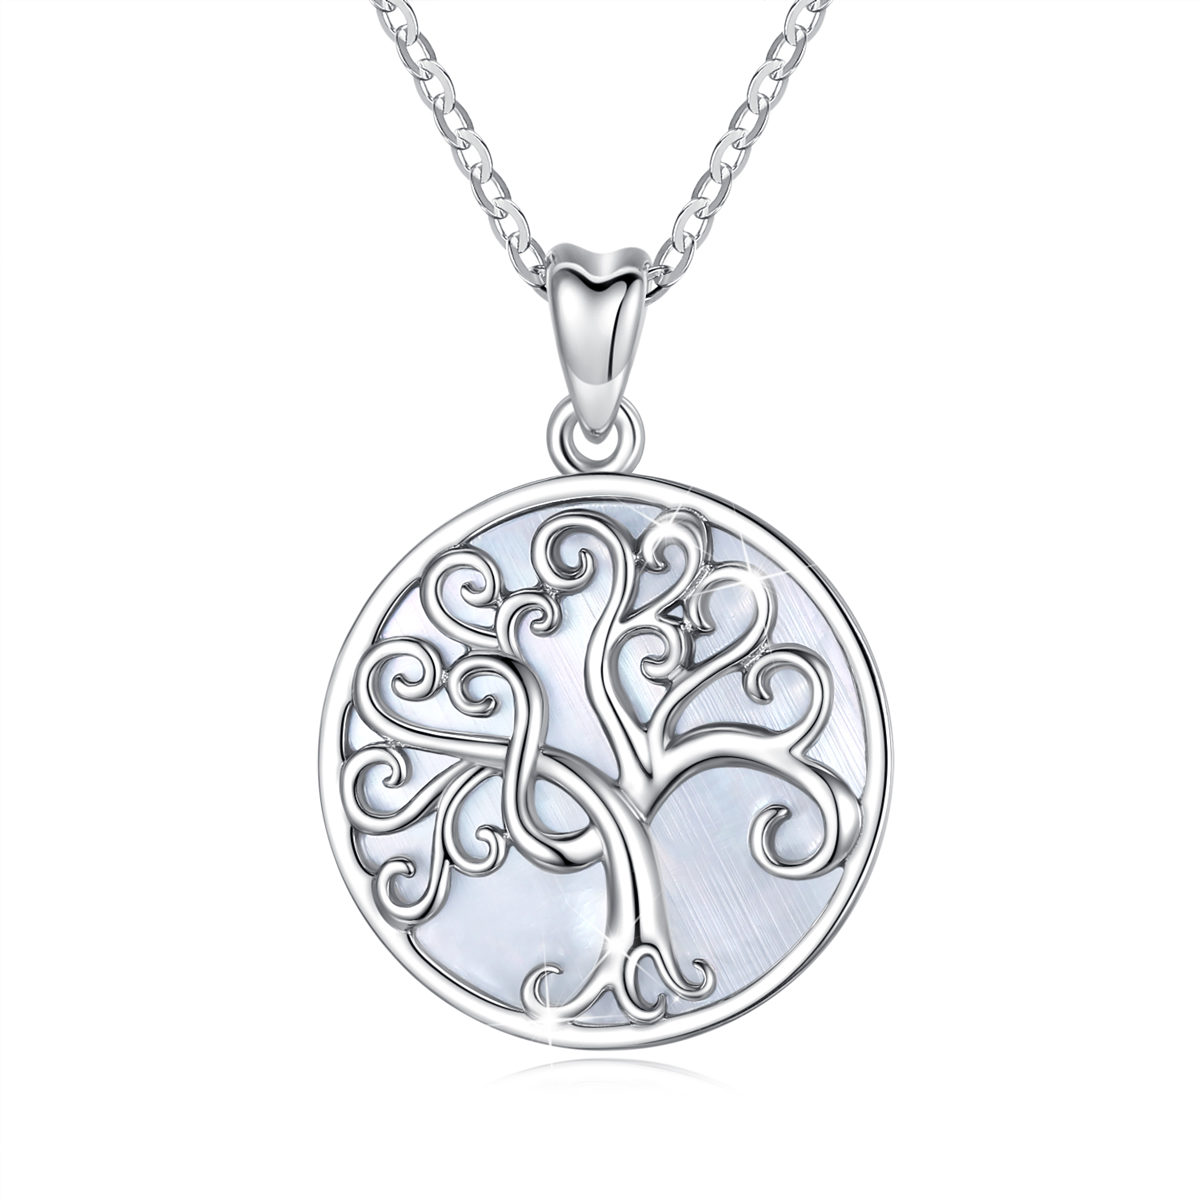 Merryshine Custom Silver Pendent 925 Sterling Silver Pendent Mother of Pearl Tree Life Pendant Necklace